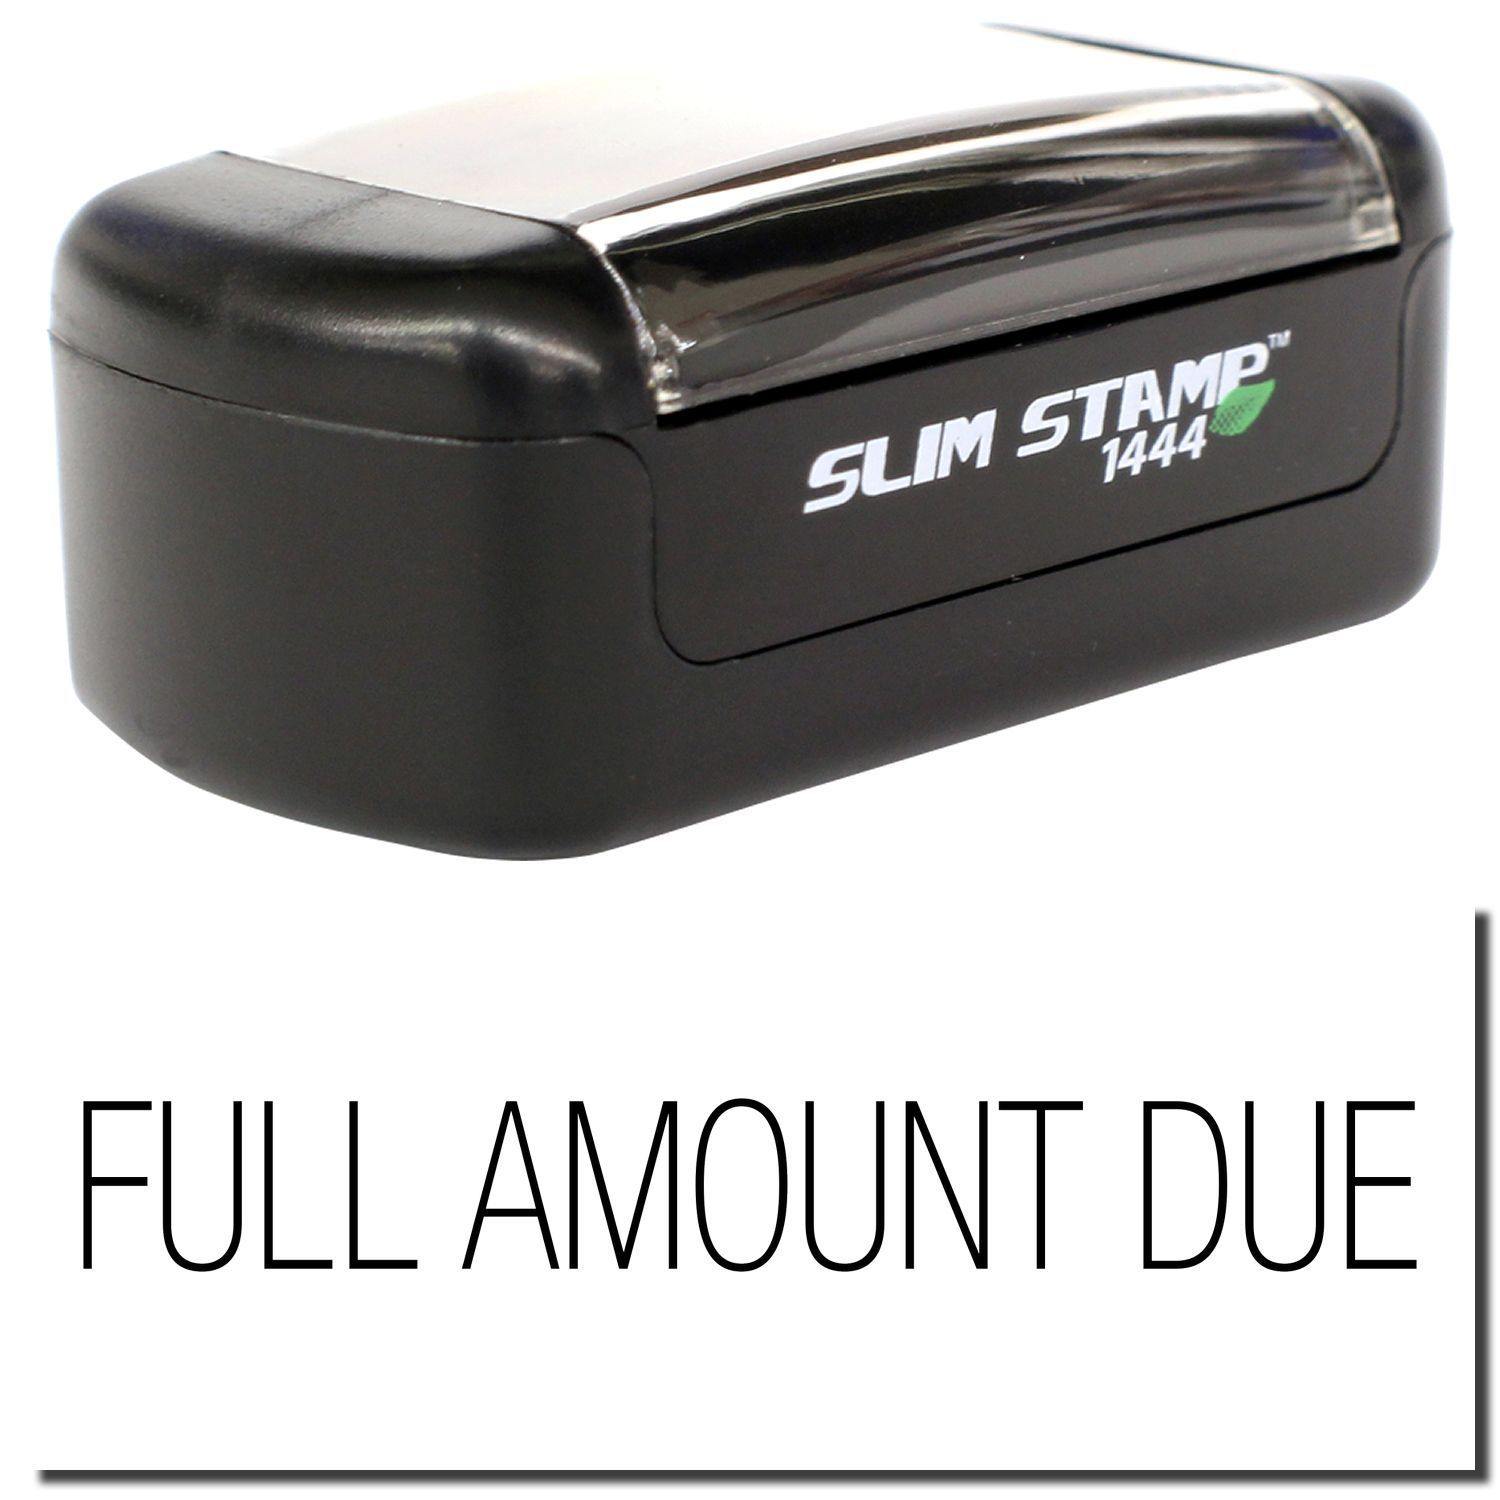 A stock office pre-inked stamp with a stamped image showing how the text "FULL AMOUNT DUE" is displayed after stamping.